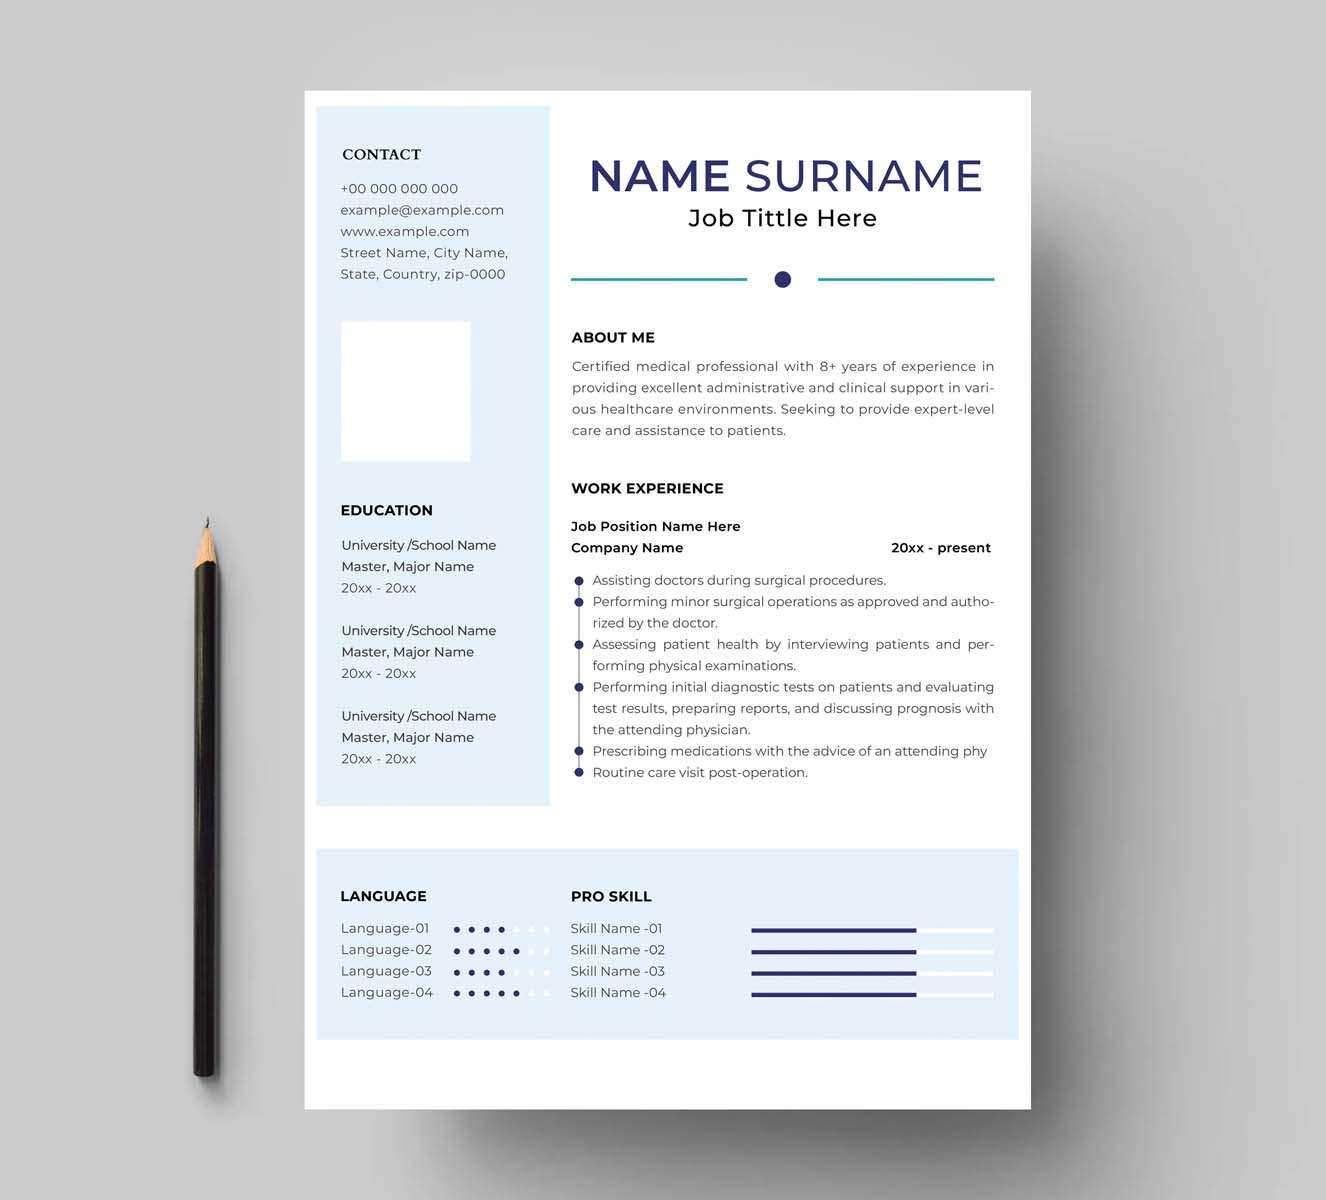 Blue and white resume template with a pencil.